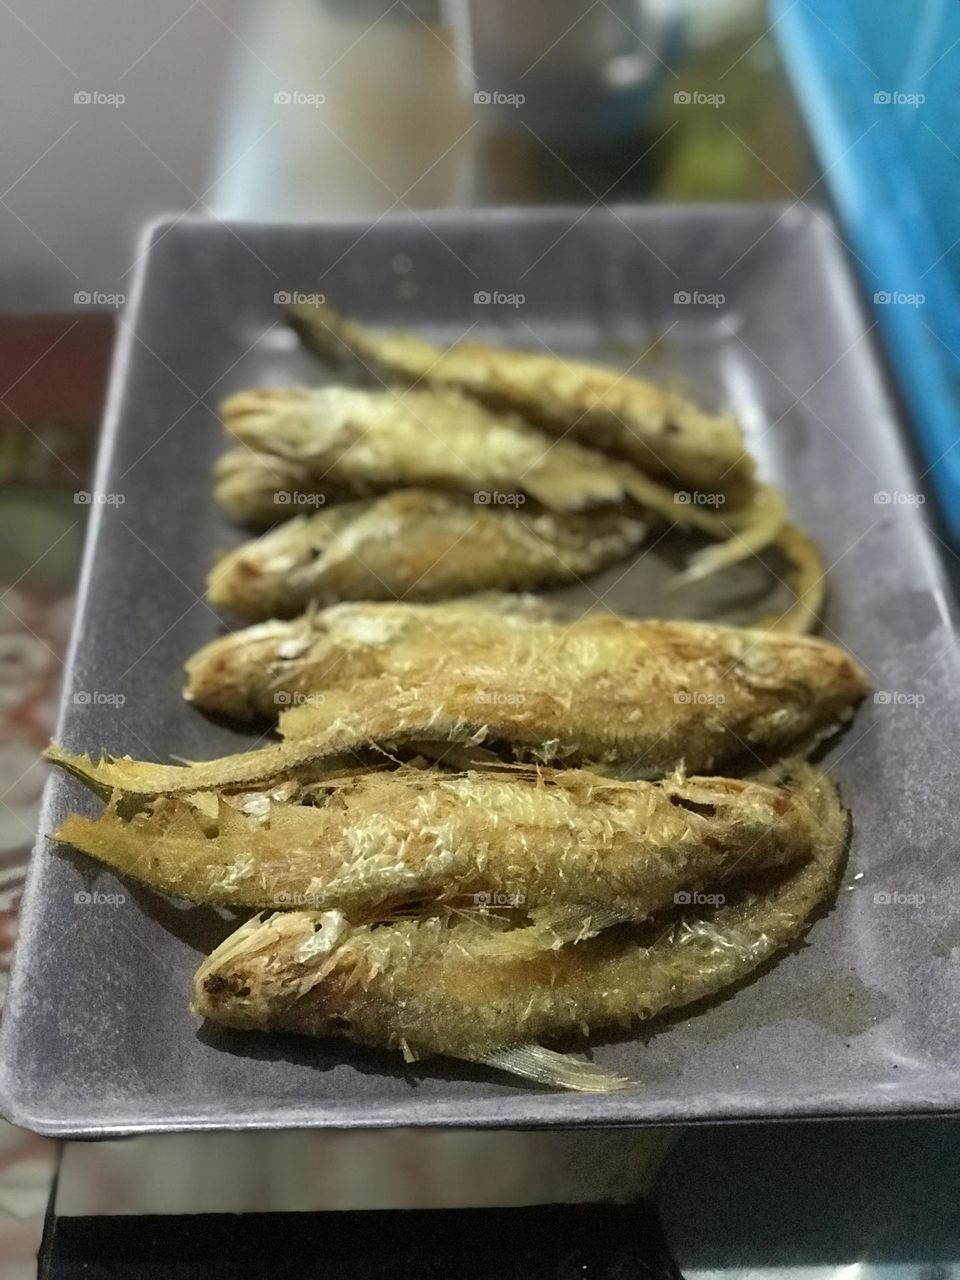 Crispy Fish (Fried Ikan Gonjeng)- This type of fish is only found in my country, Sarawak